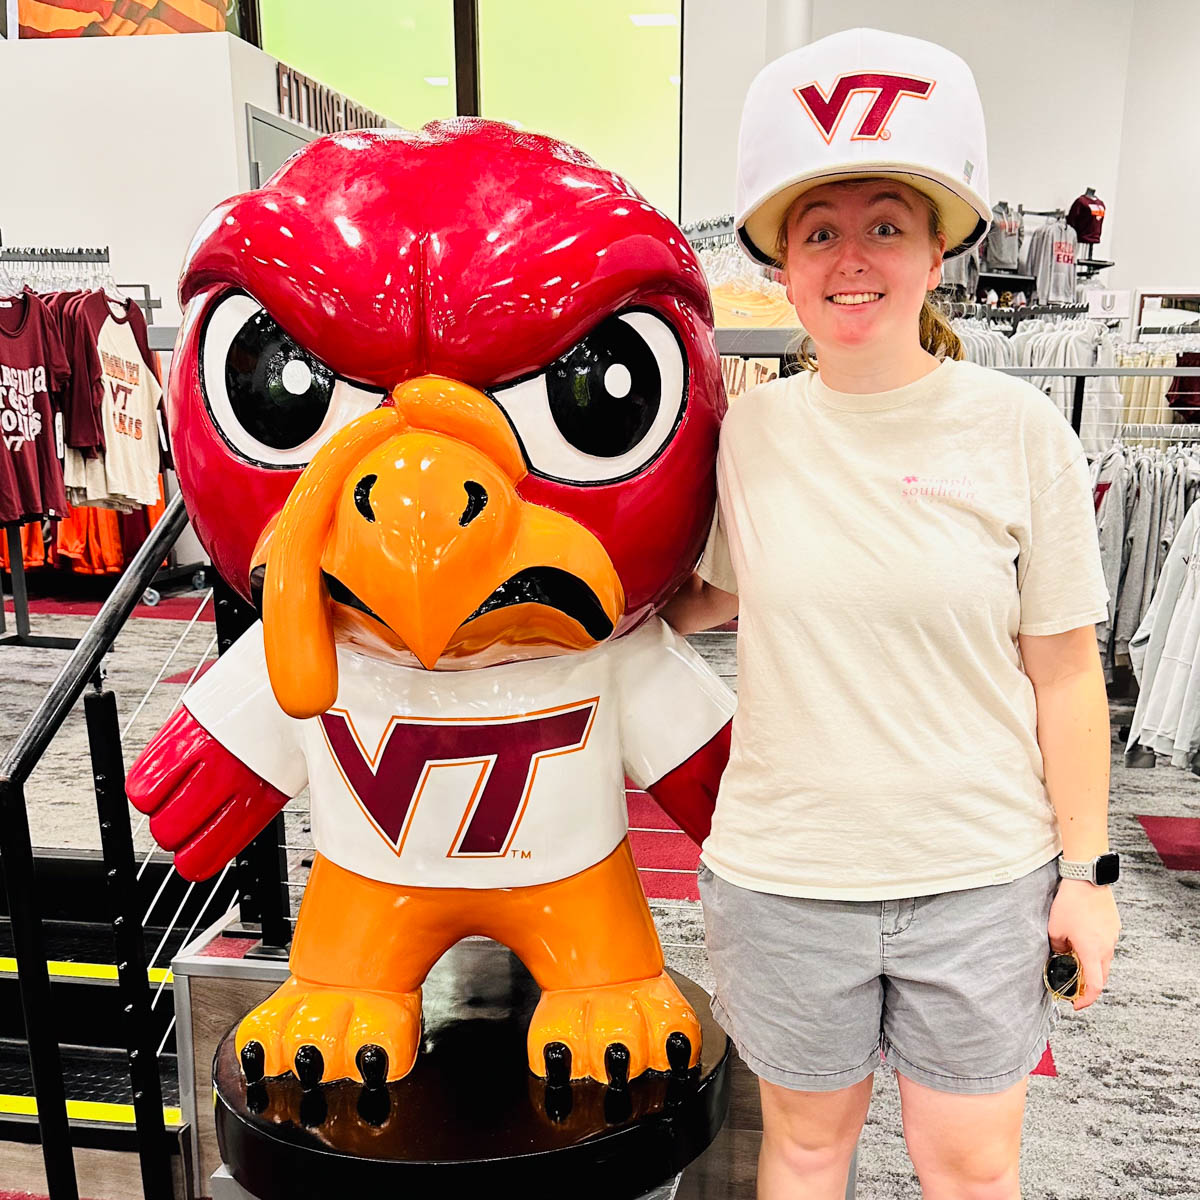 A prospective student visits the VT university book store and stands next to a statue of the Hokie bird mascot.